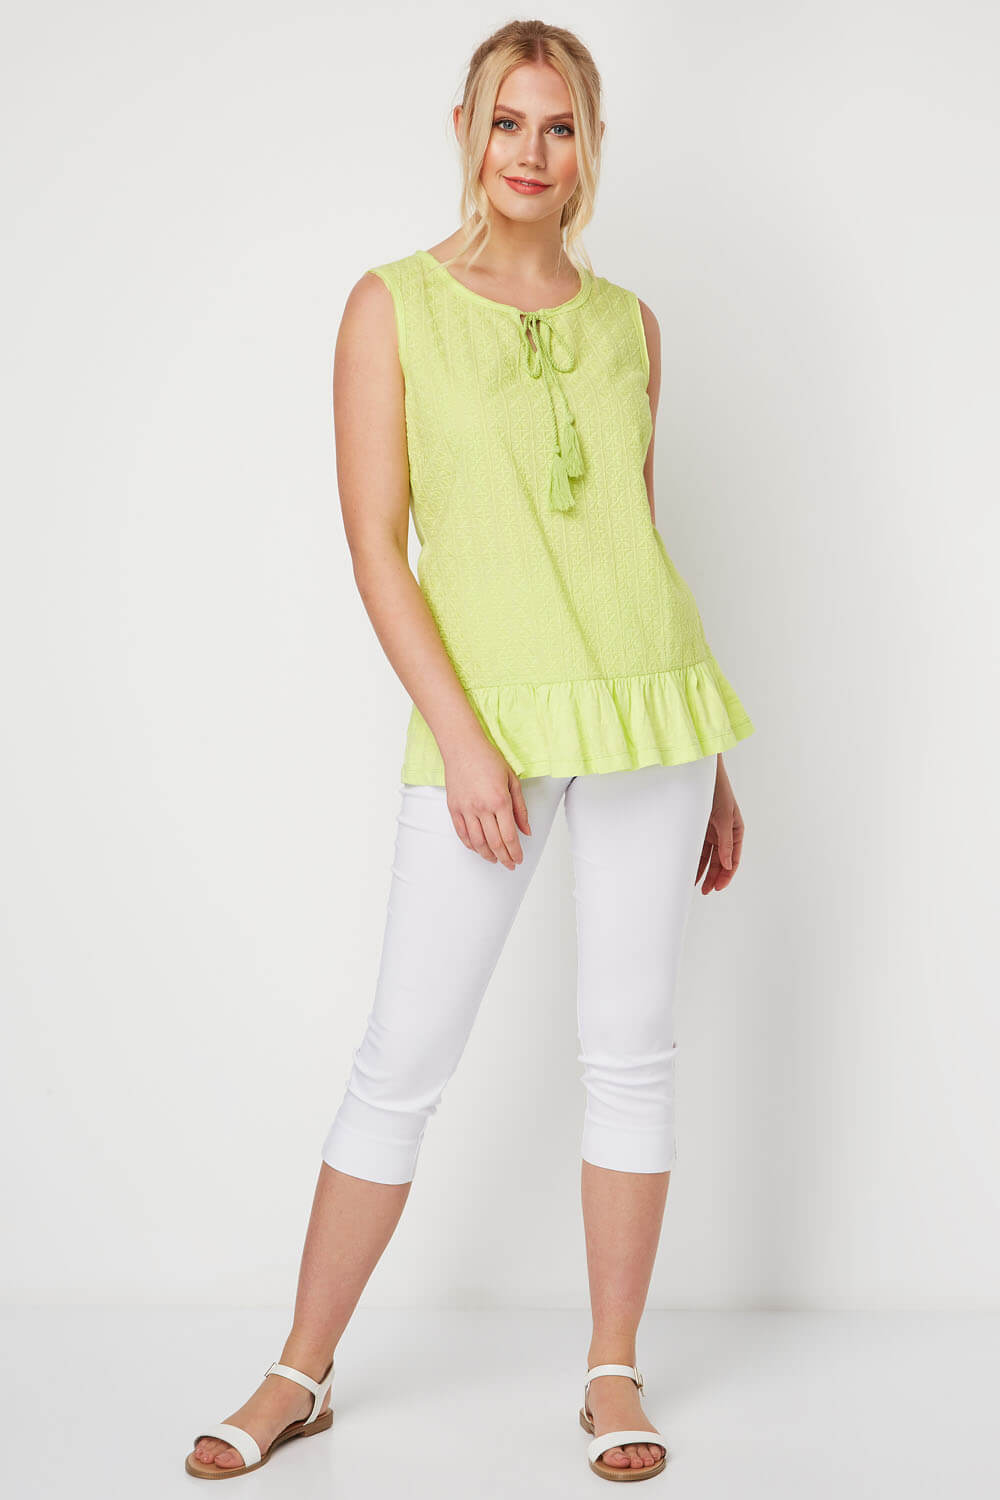 Lime Frill Hem Textured Top, Image 2 of 8